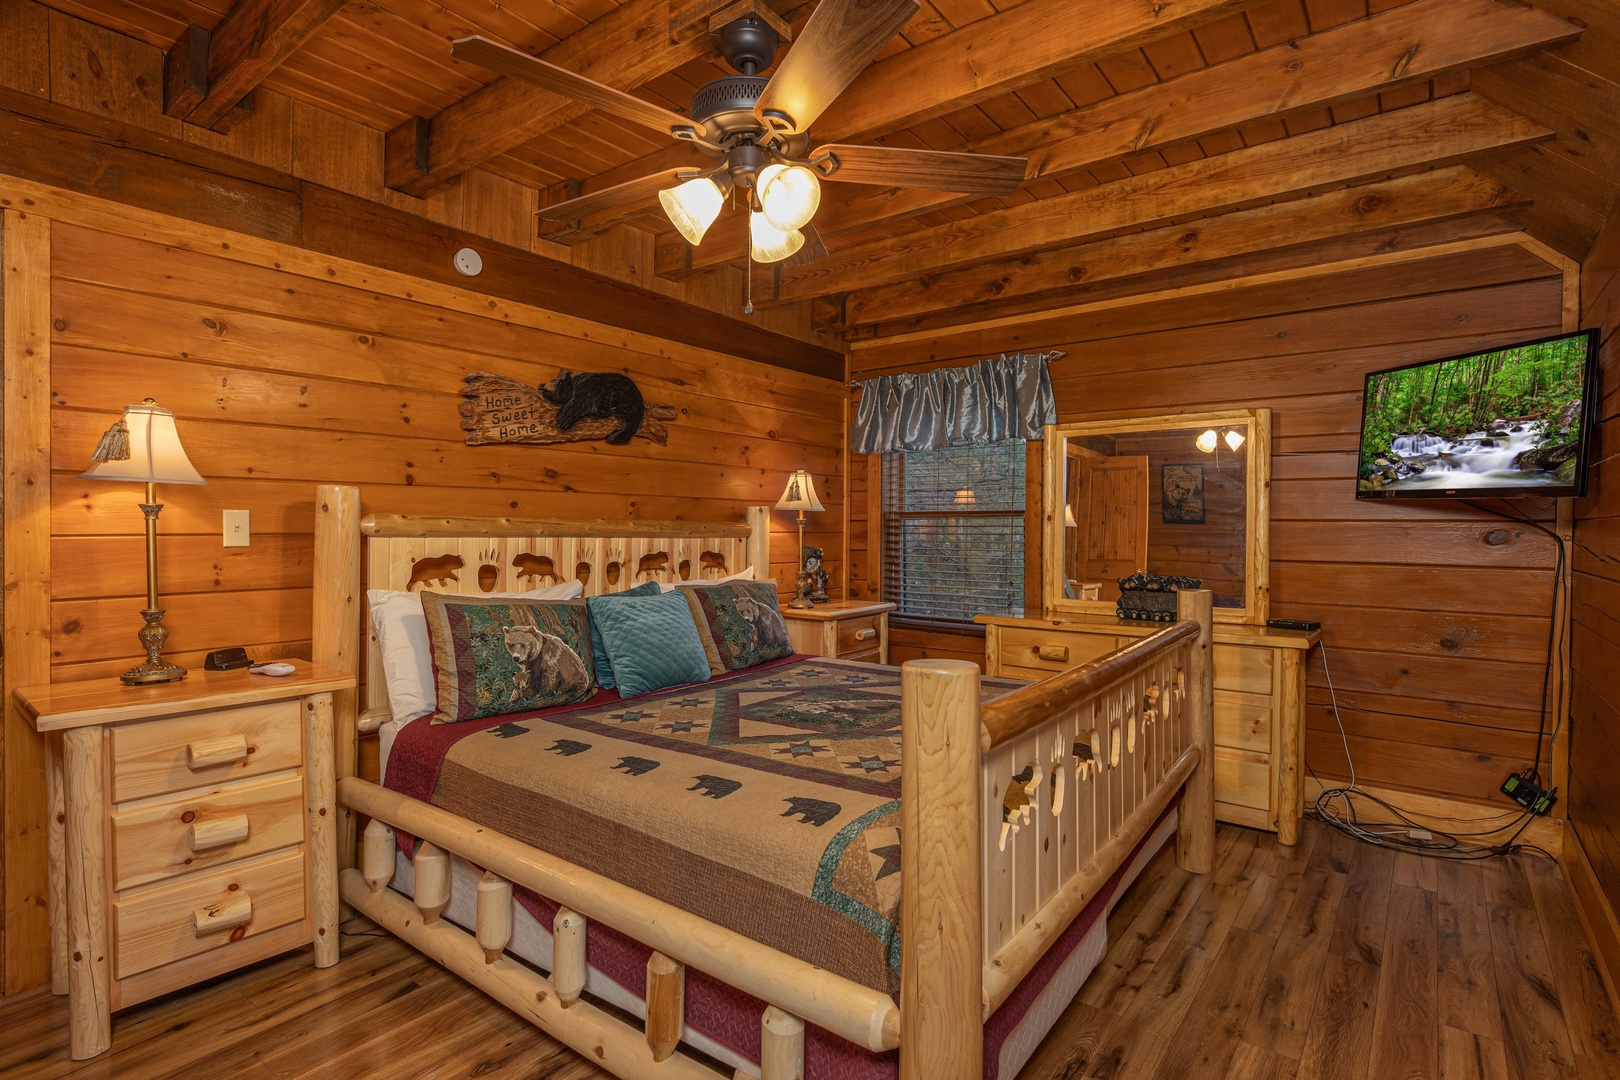 Dresser, night stand, and TV in a bedroom at Pigeon Forge Pleasures, a 3 bedroom cabin rental located in Pigeon Forge